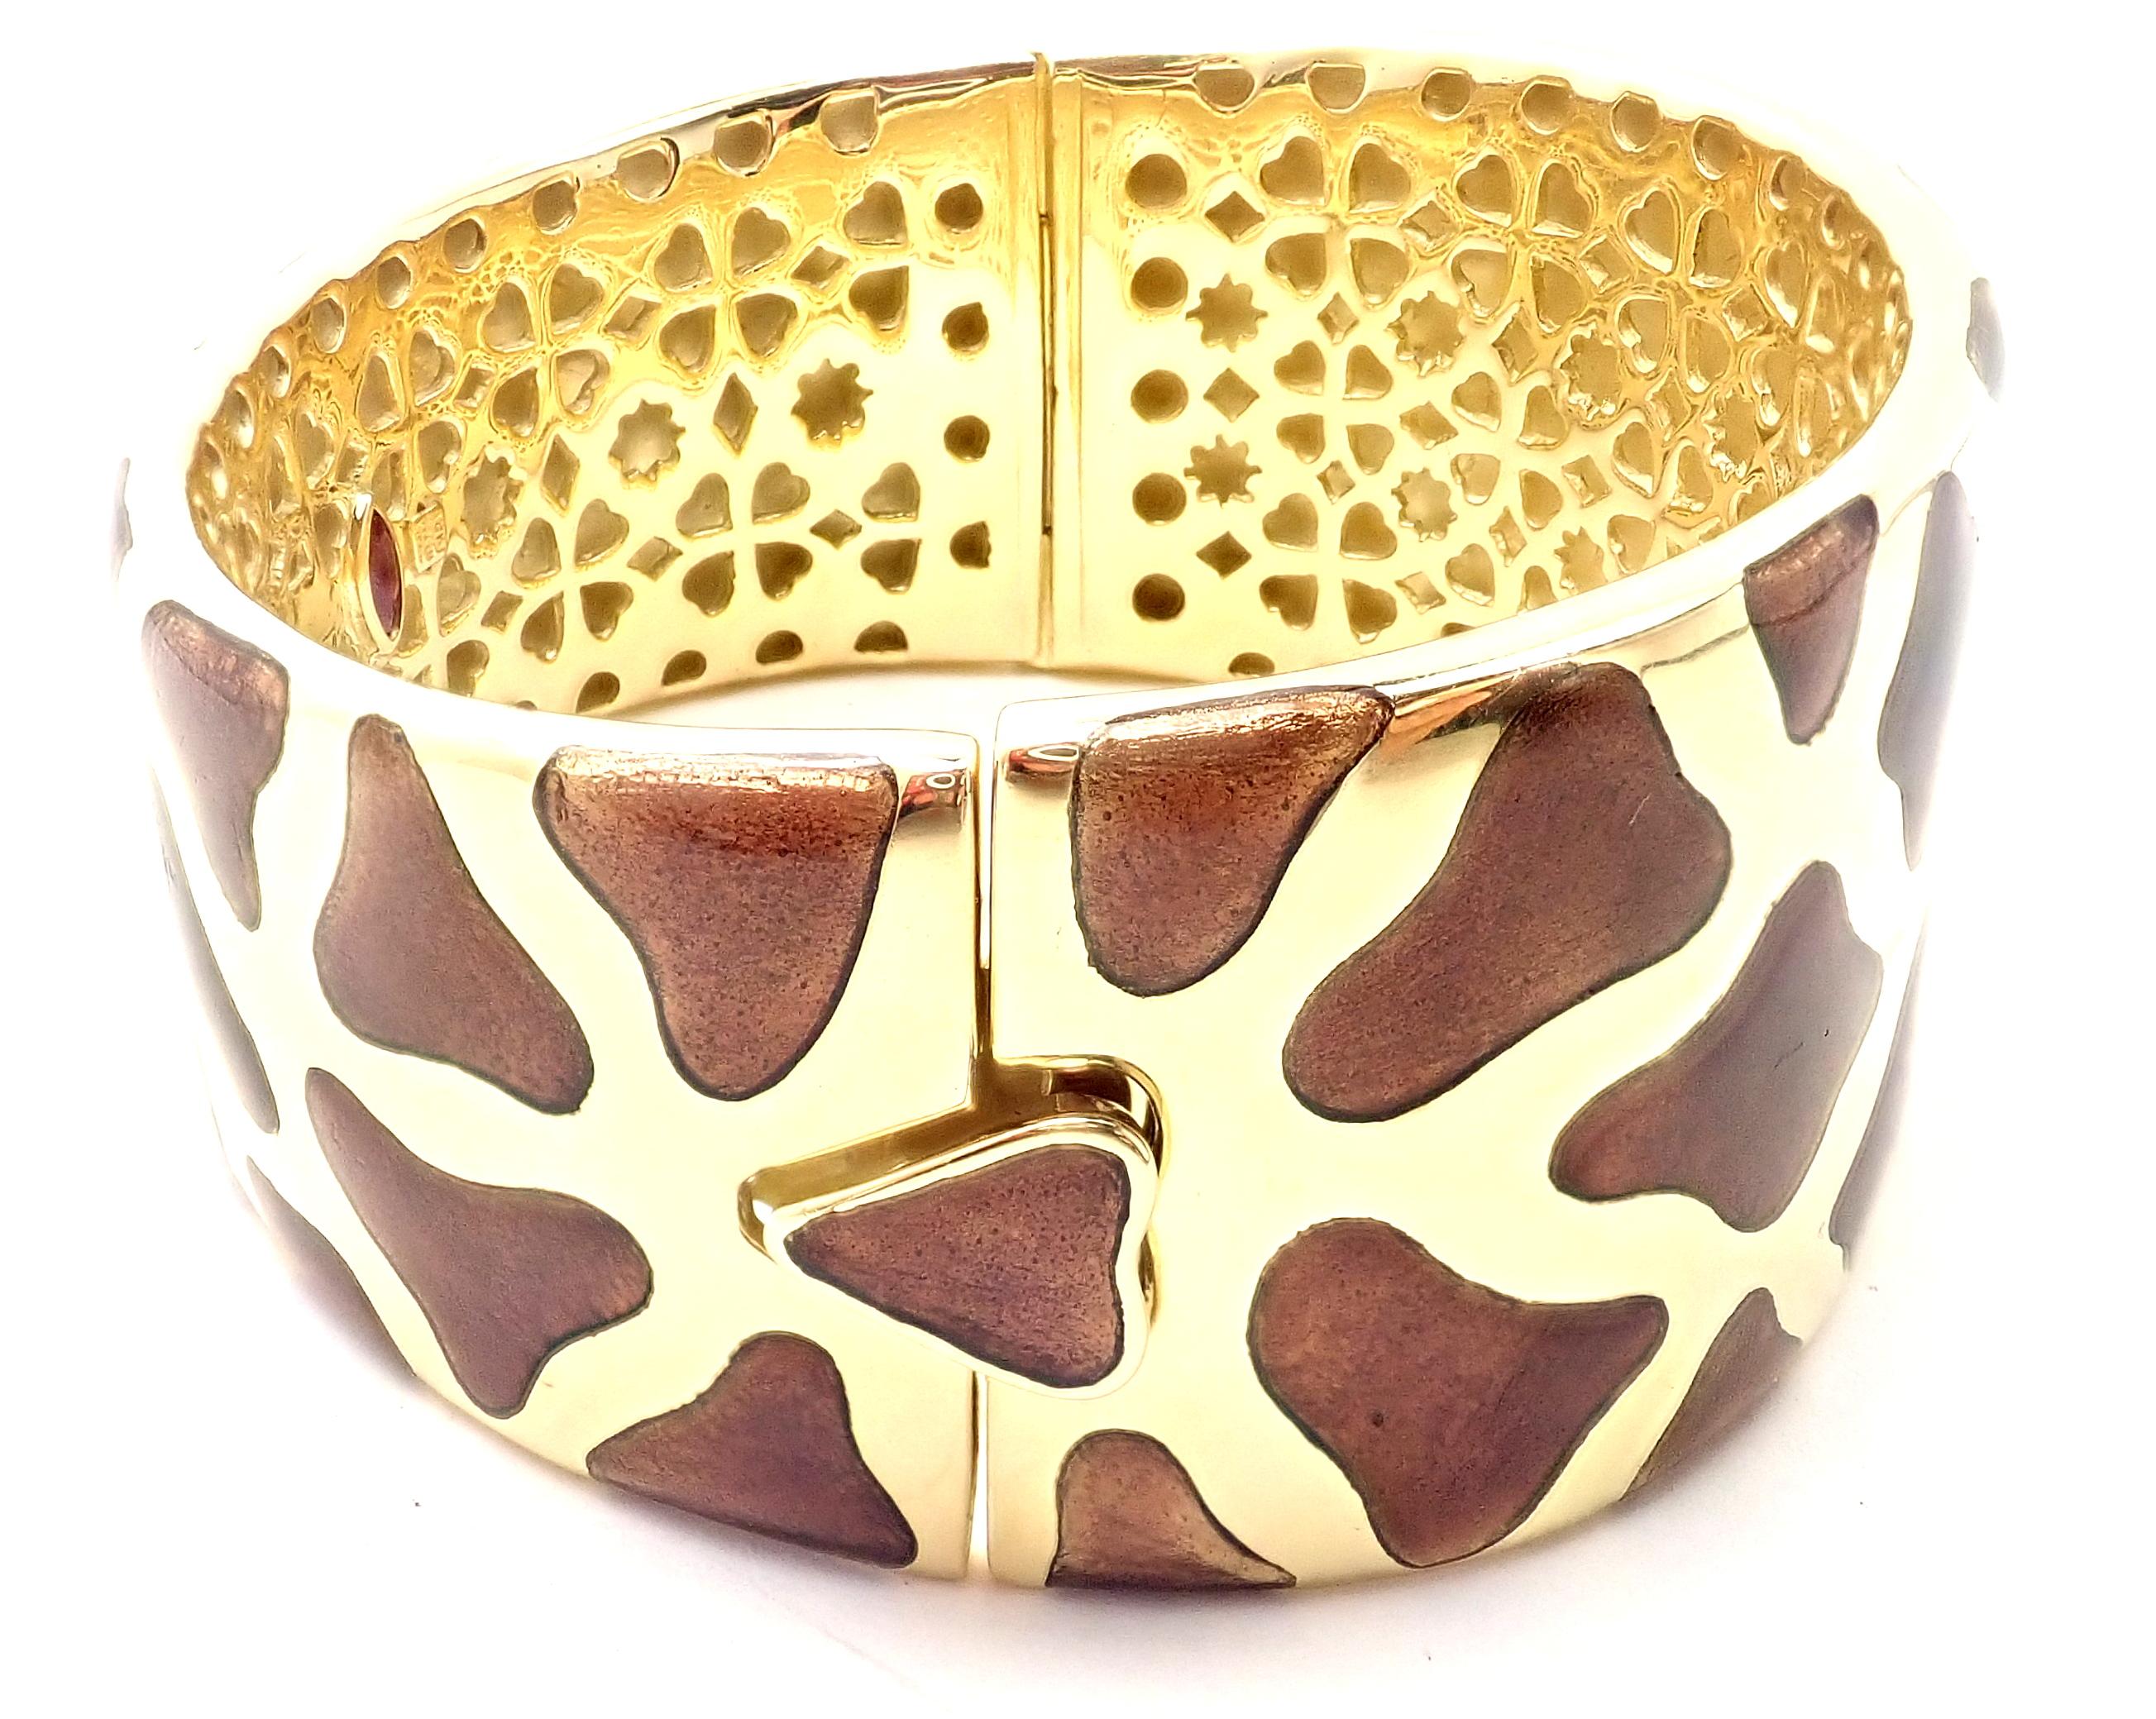 18k Yellow Gold Enamel Giraffe Bangle Bracelet by Roberto Coin.
With 1 Ruby
Details:
Length: 7